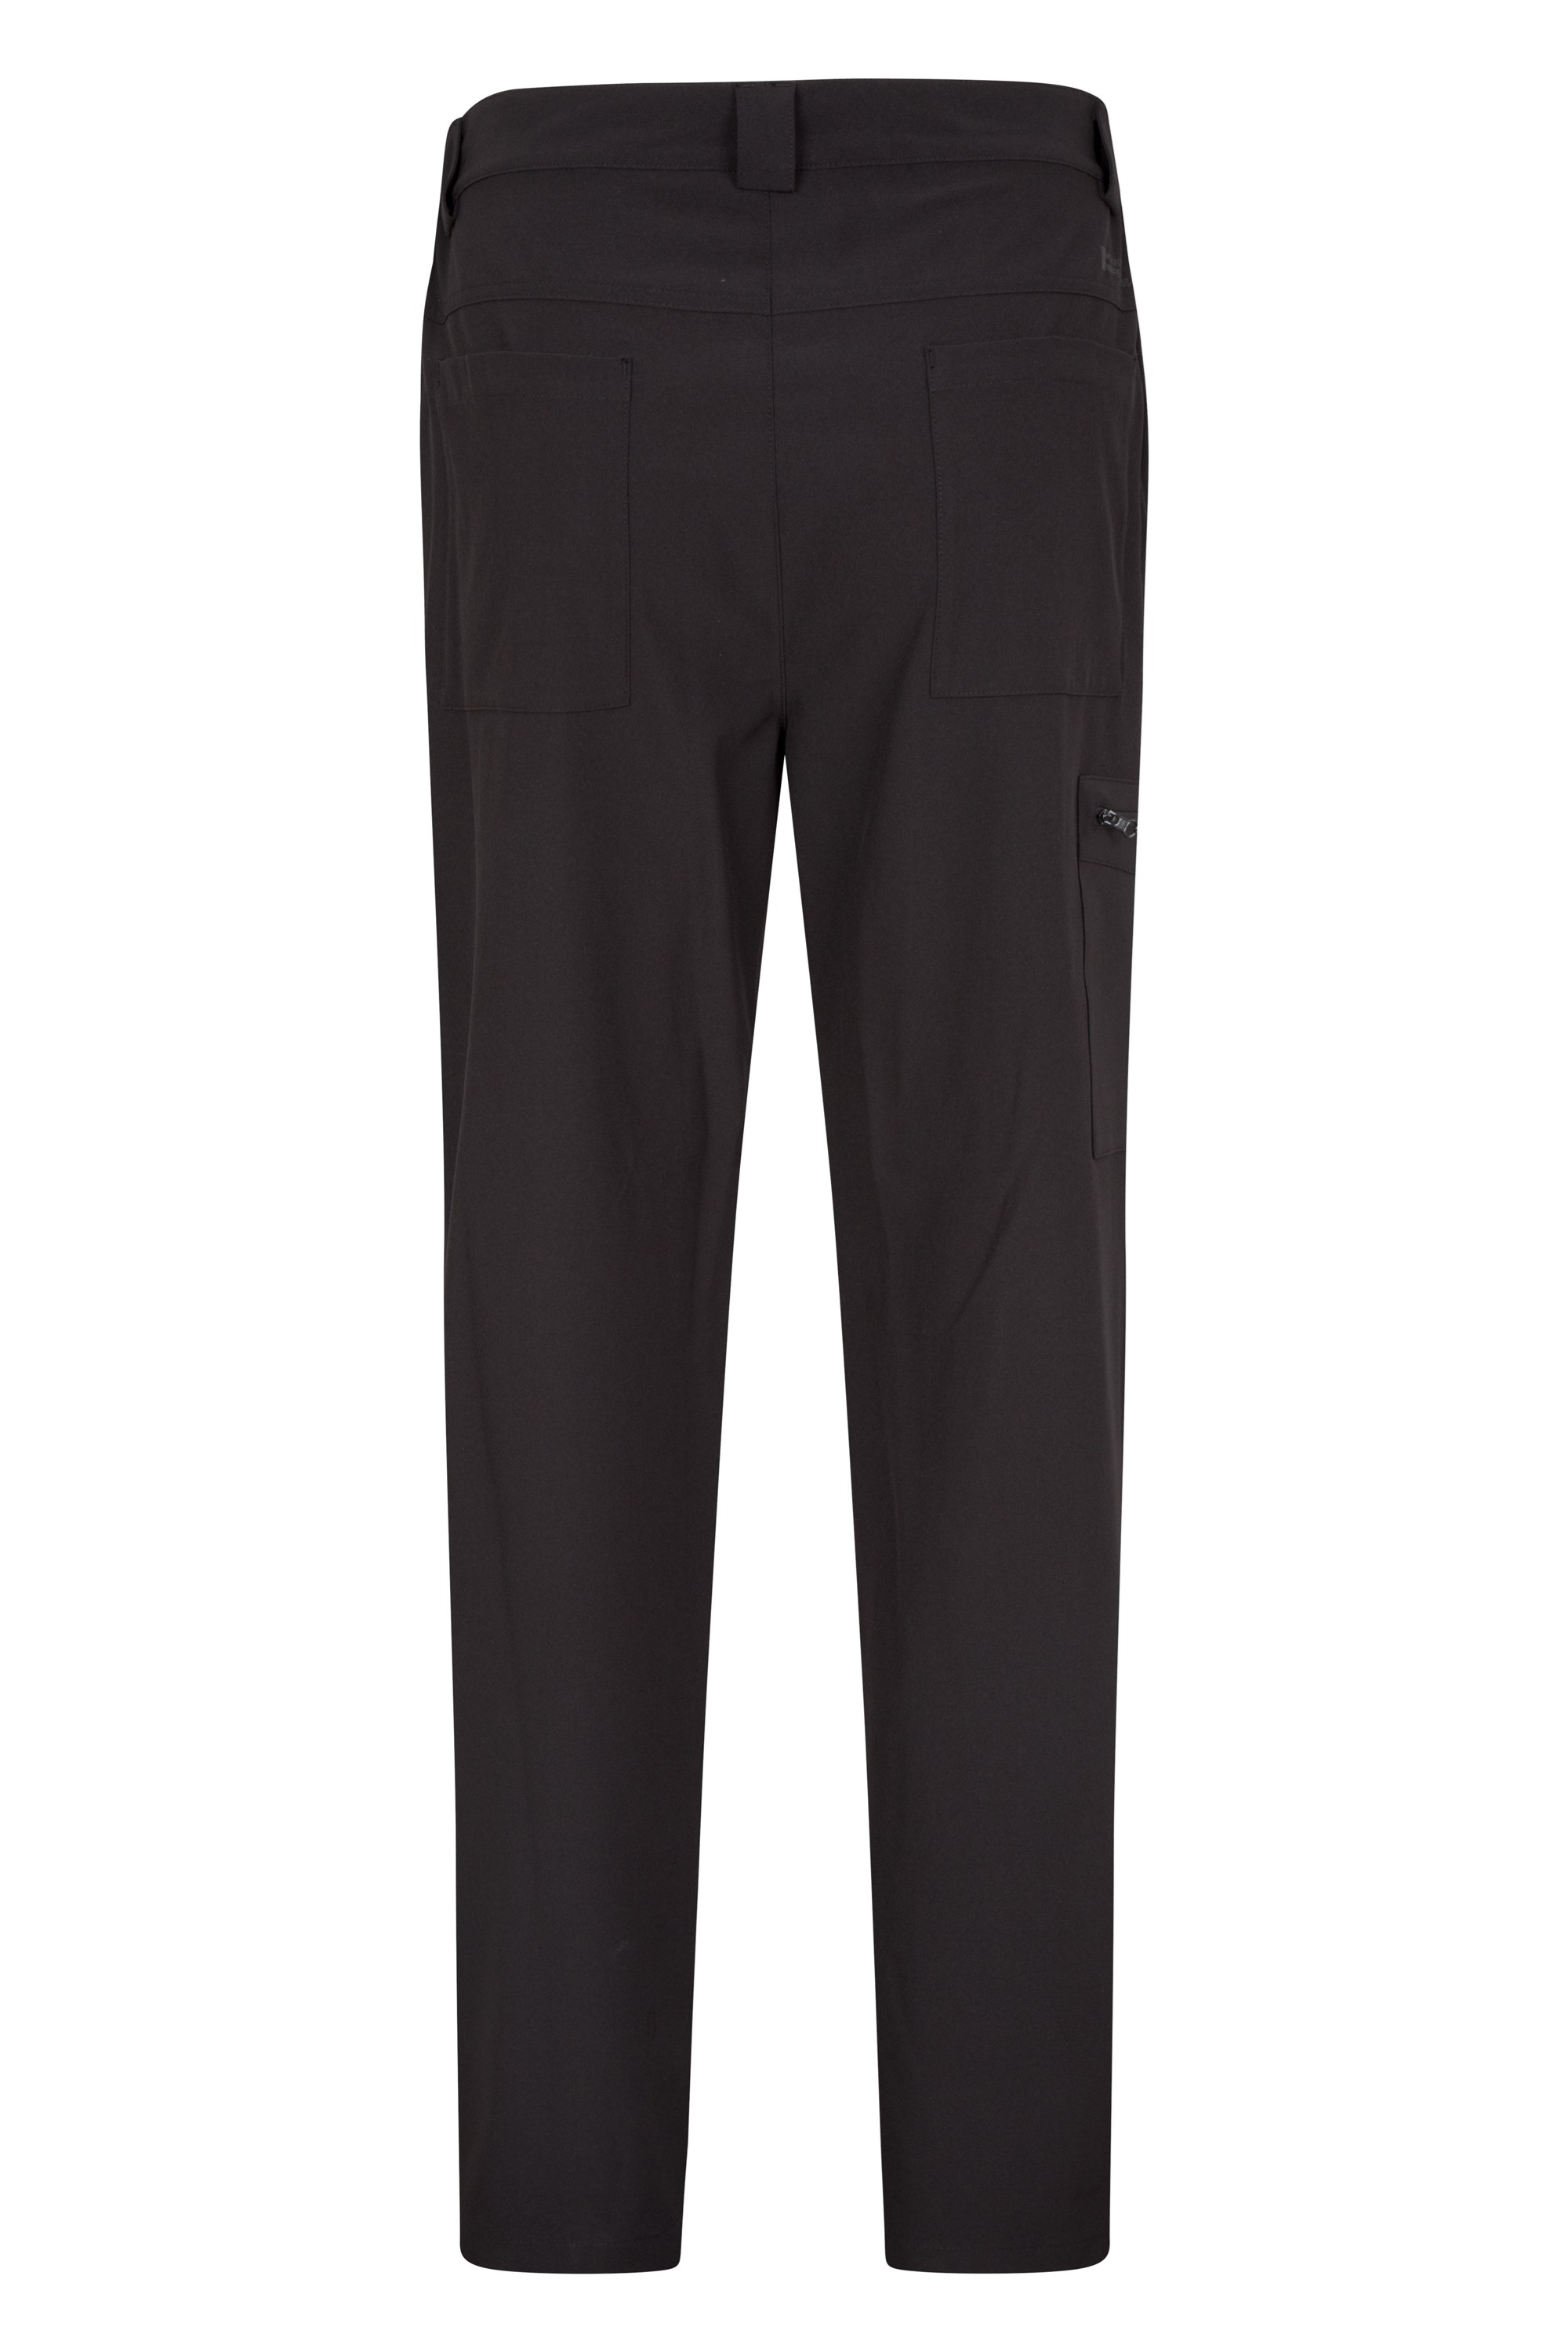 Mountain Warehouse Stride Mens Stretch Zip-Off Trousers Lightweight 